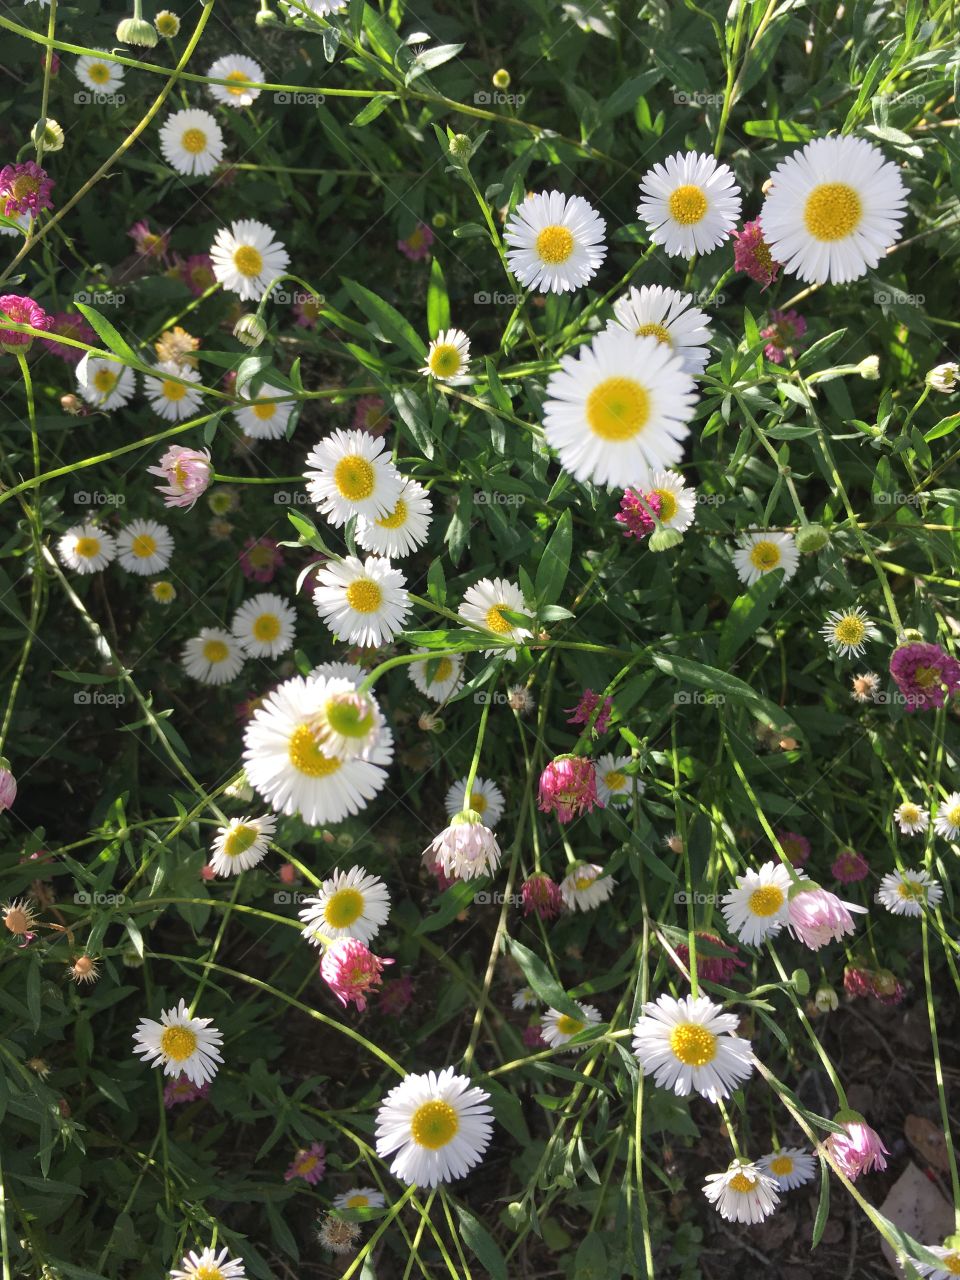 Pink and white daisy-like flowers